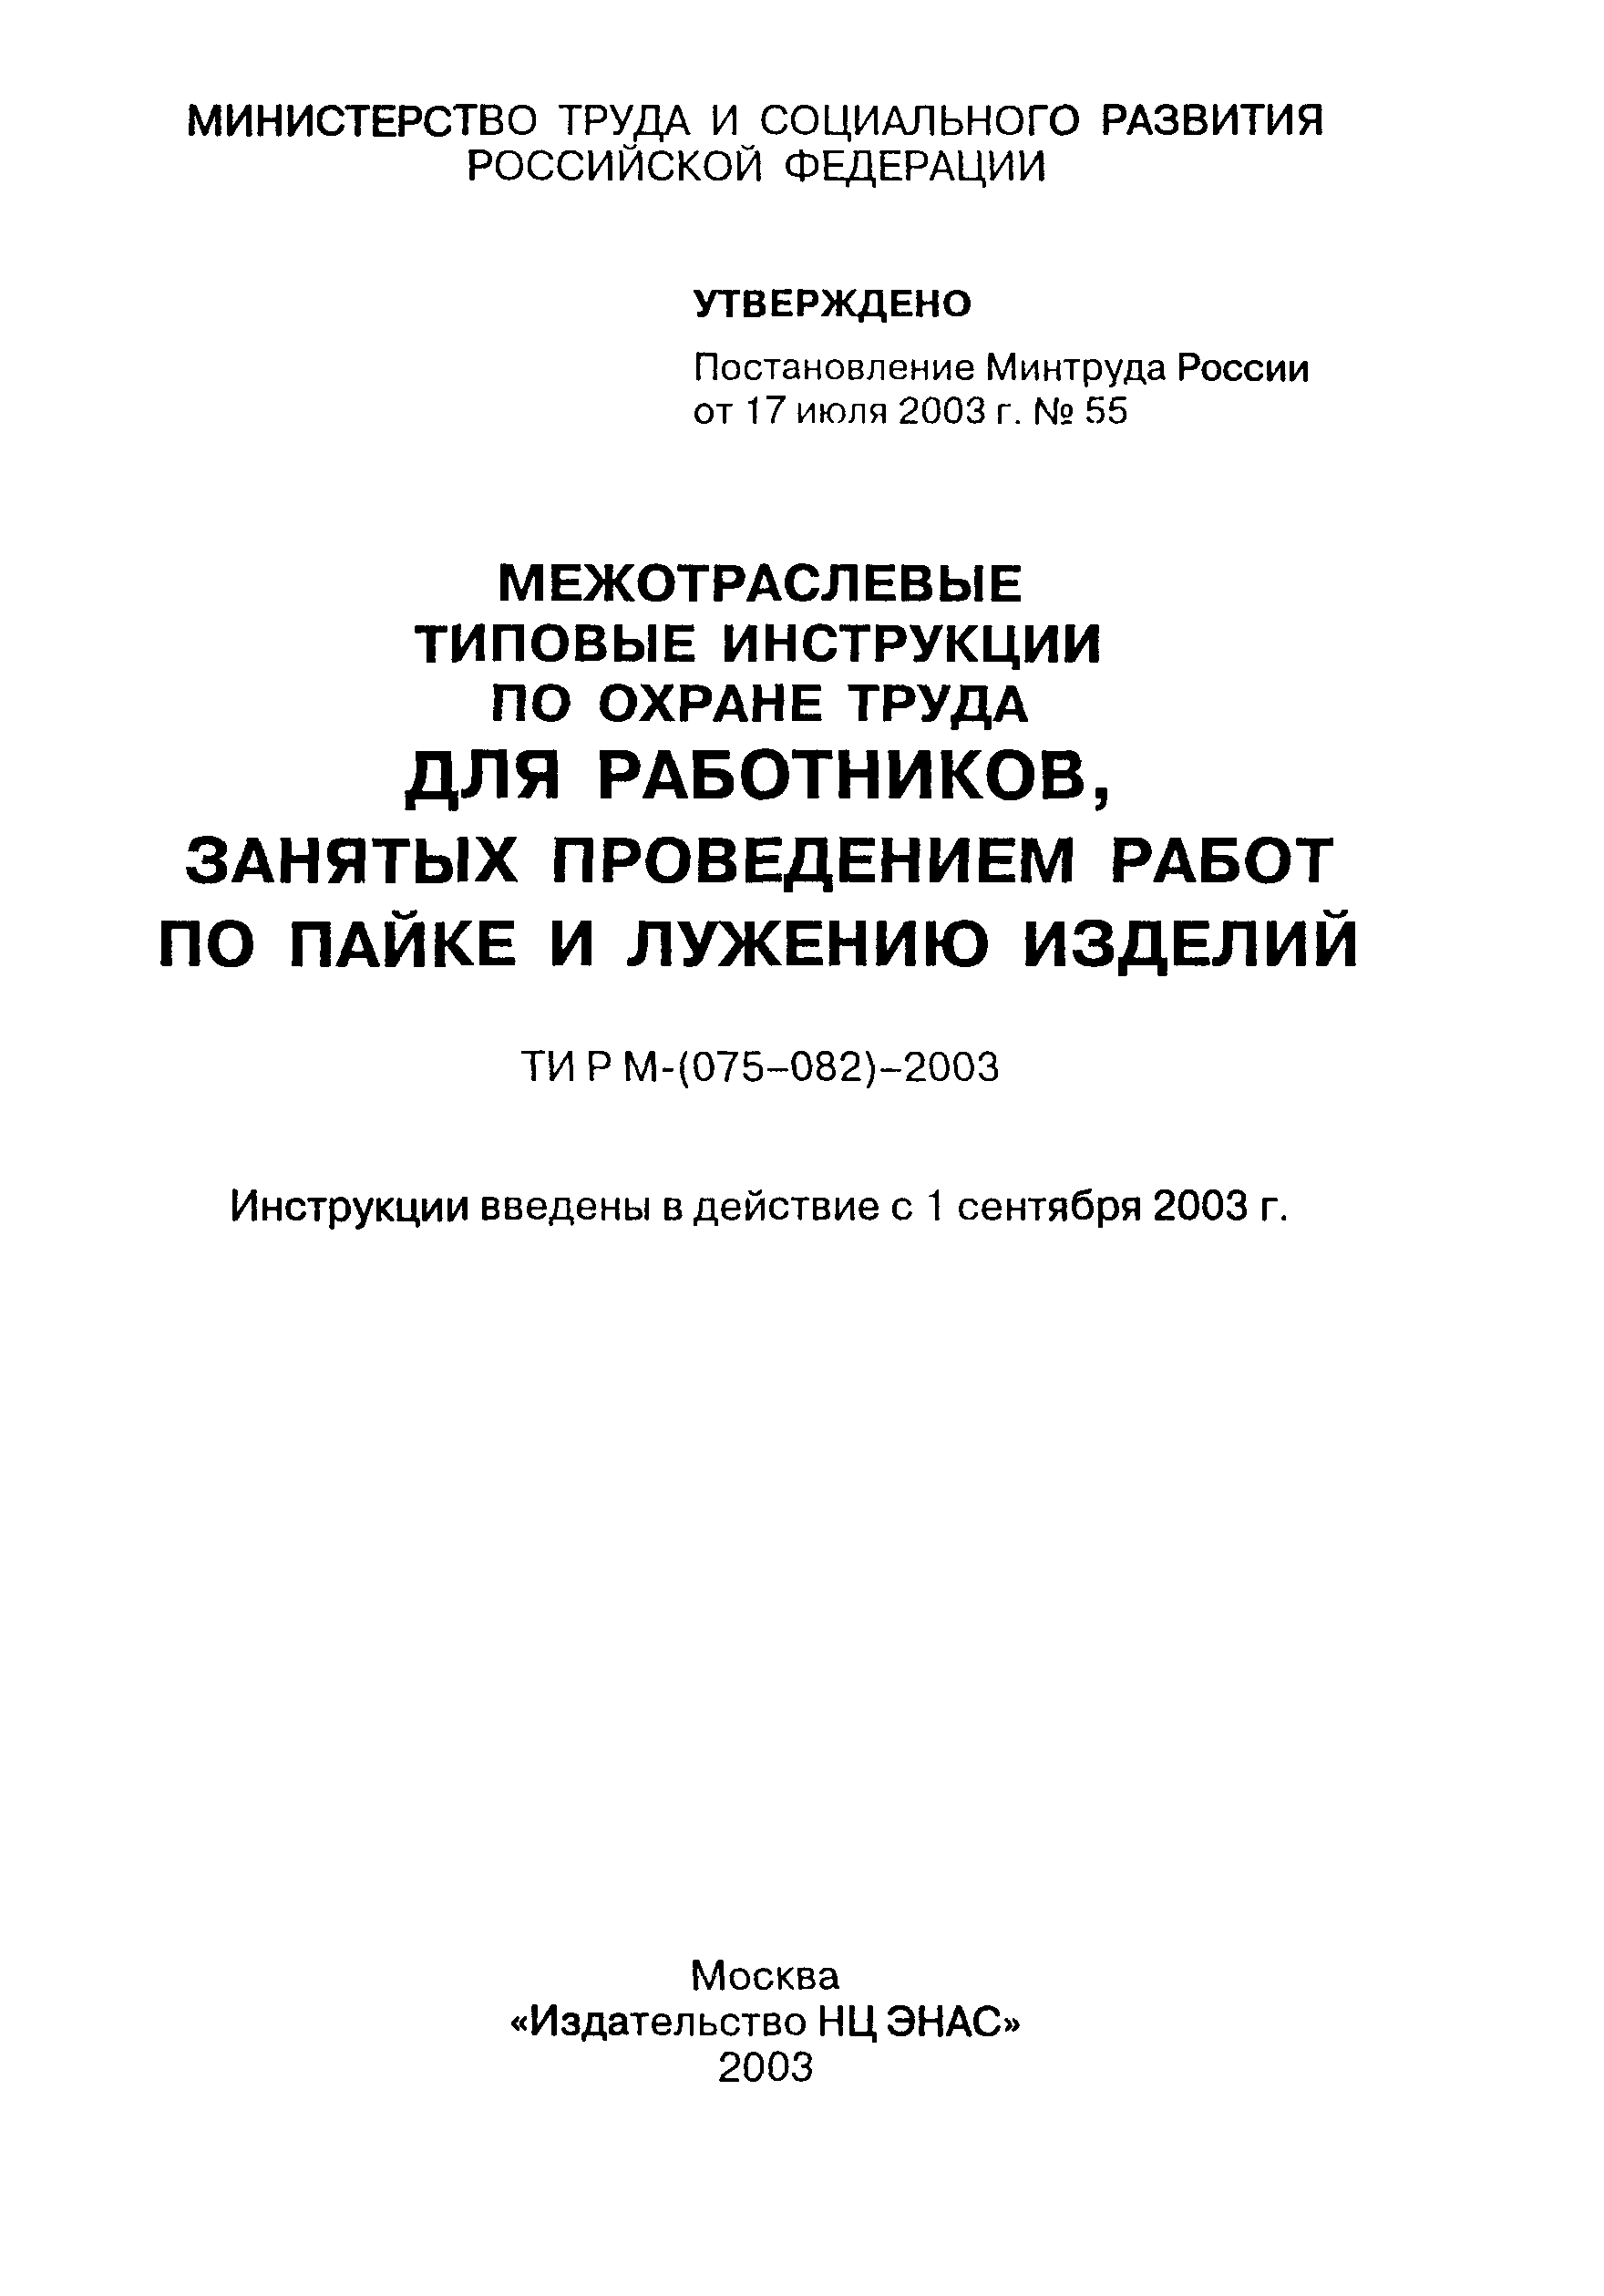 ТИ Р М-078-2003